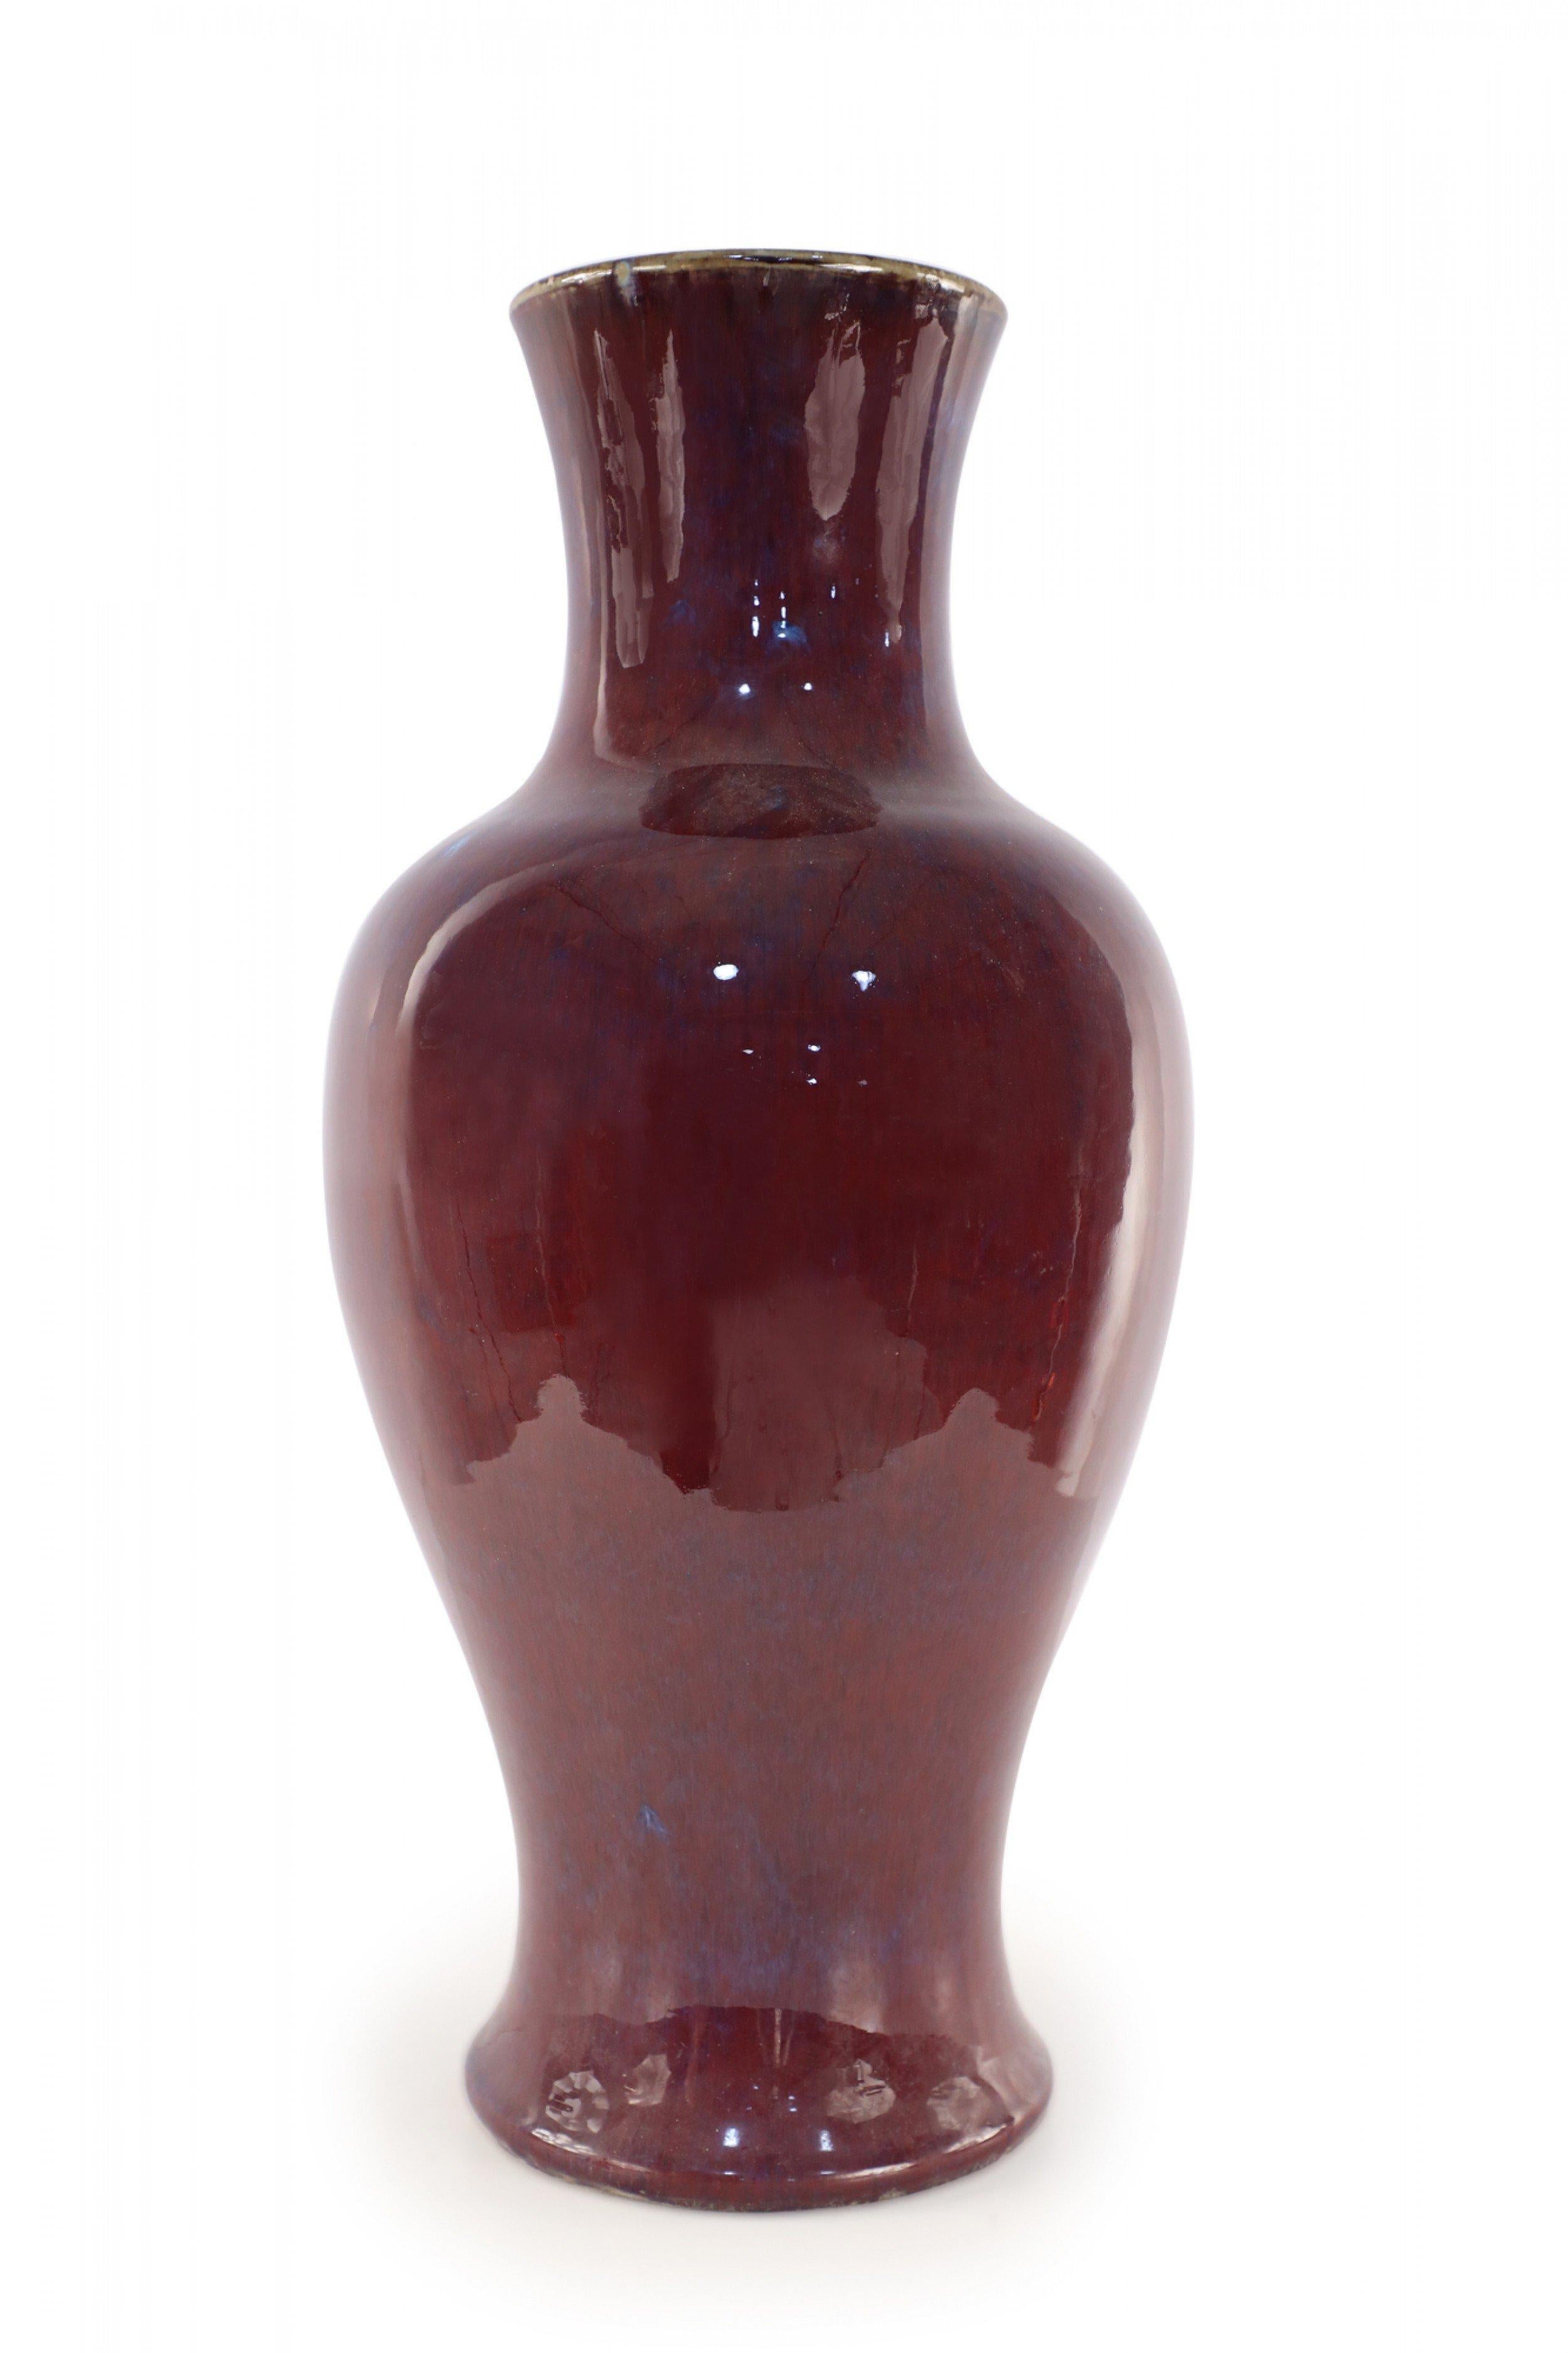 Chinese porcelain urn-form vase in a rich aubergine color overlayed with a barely visible blue base, creating highs and lows that add dimension to the finish and form.